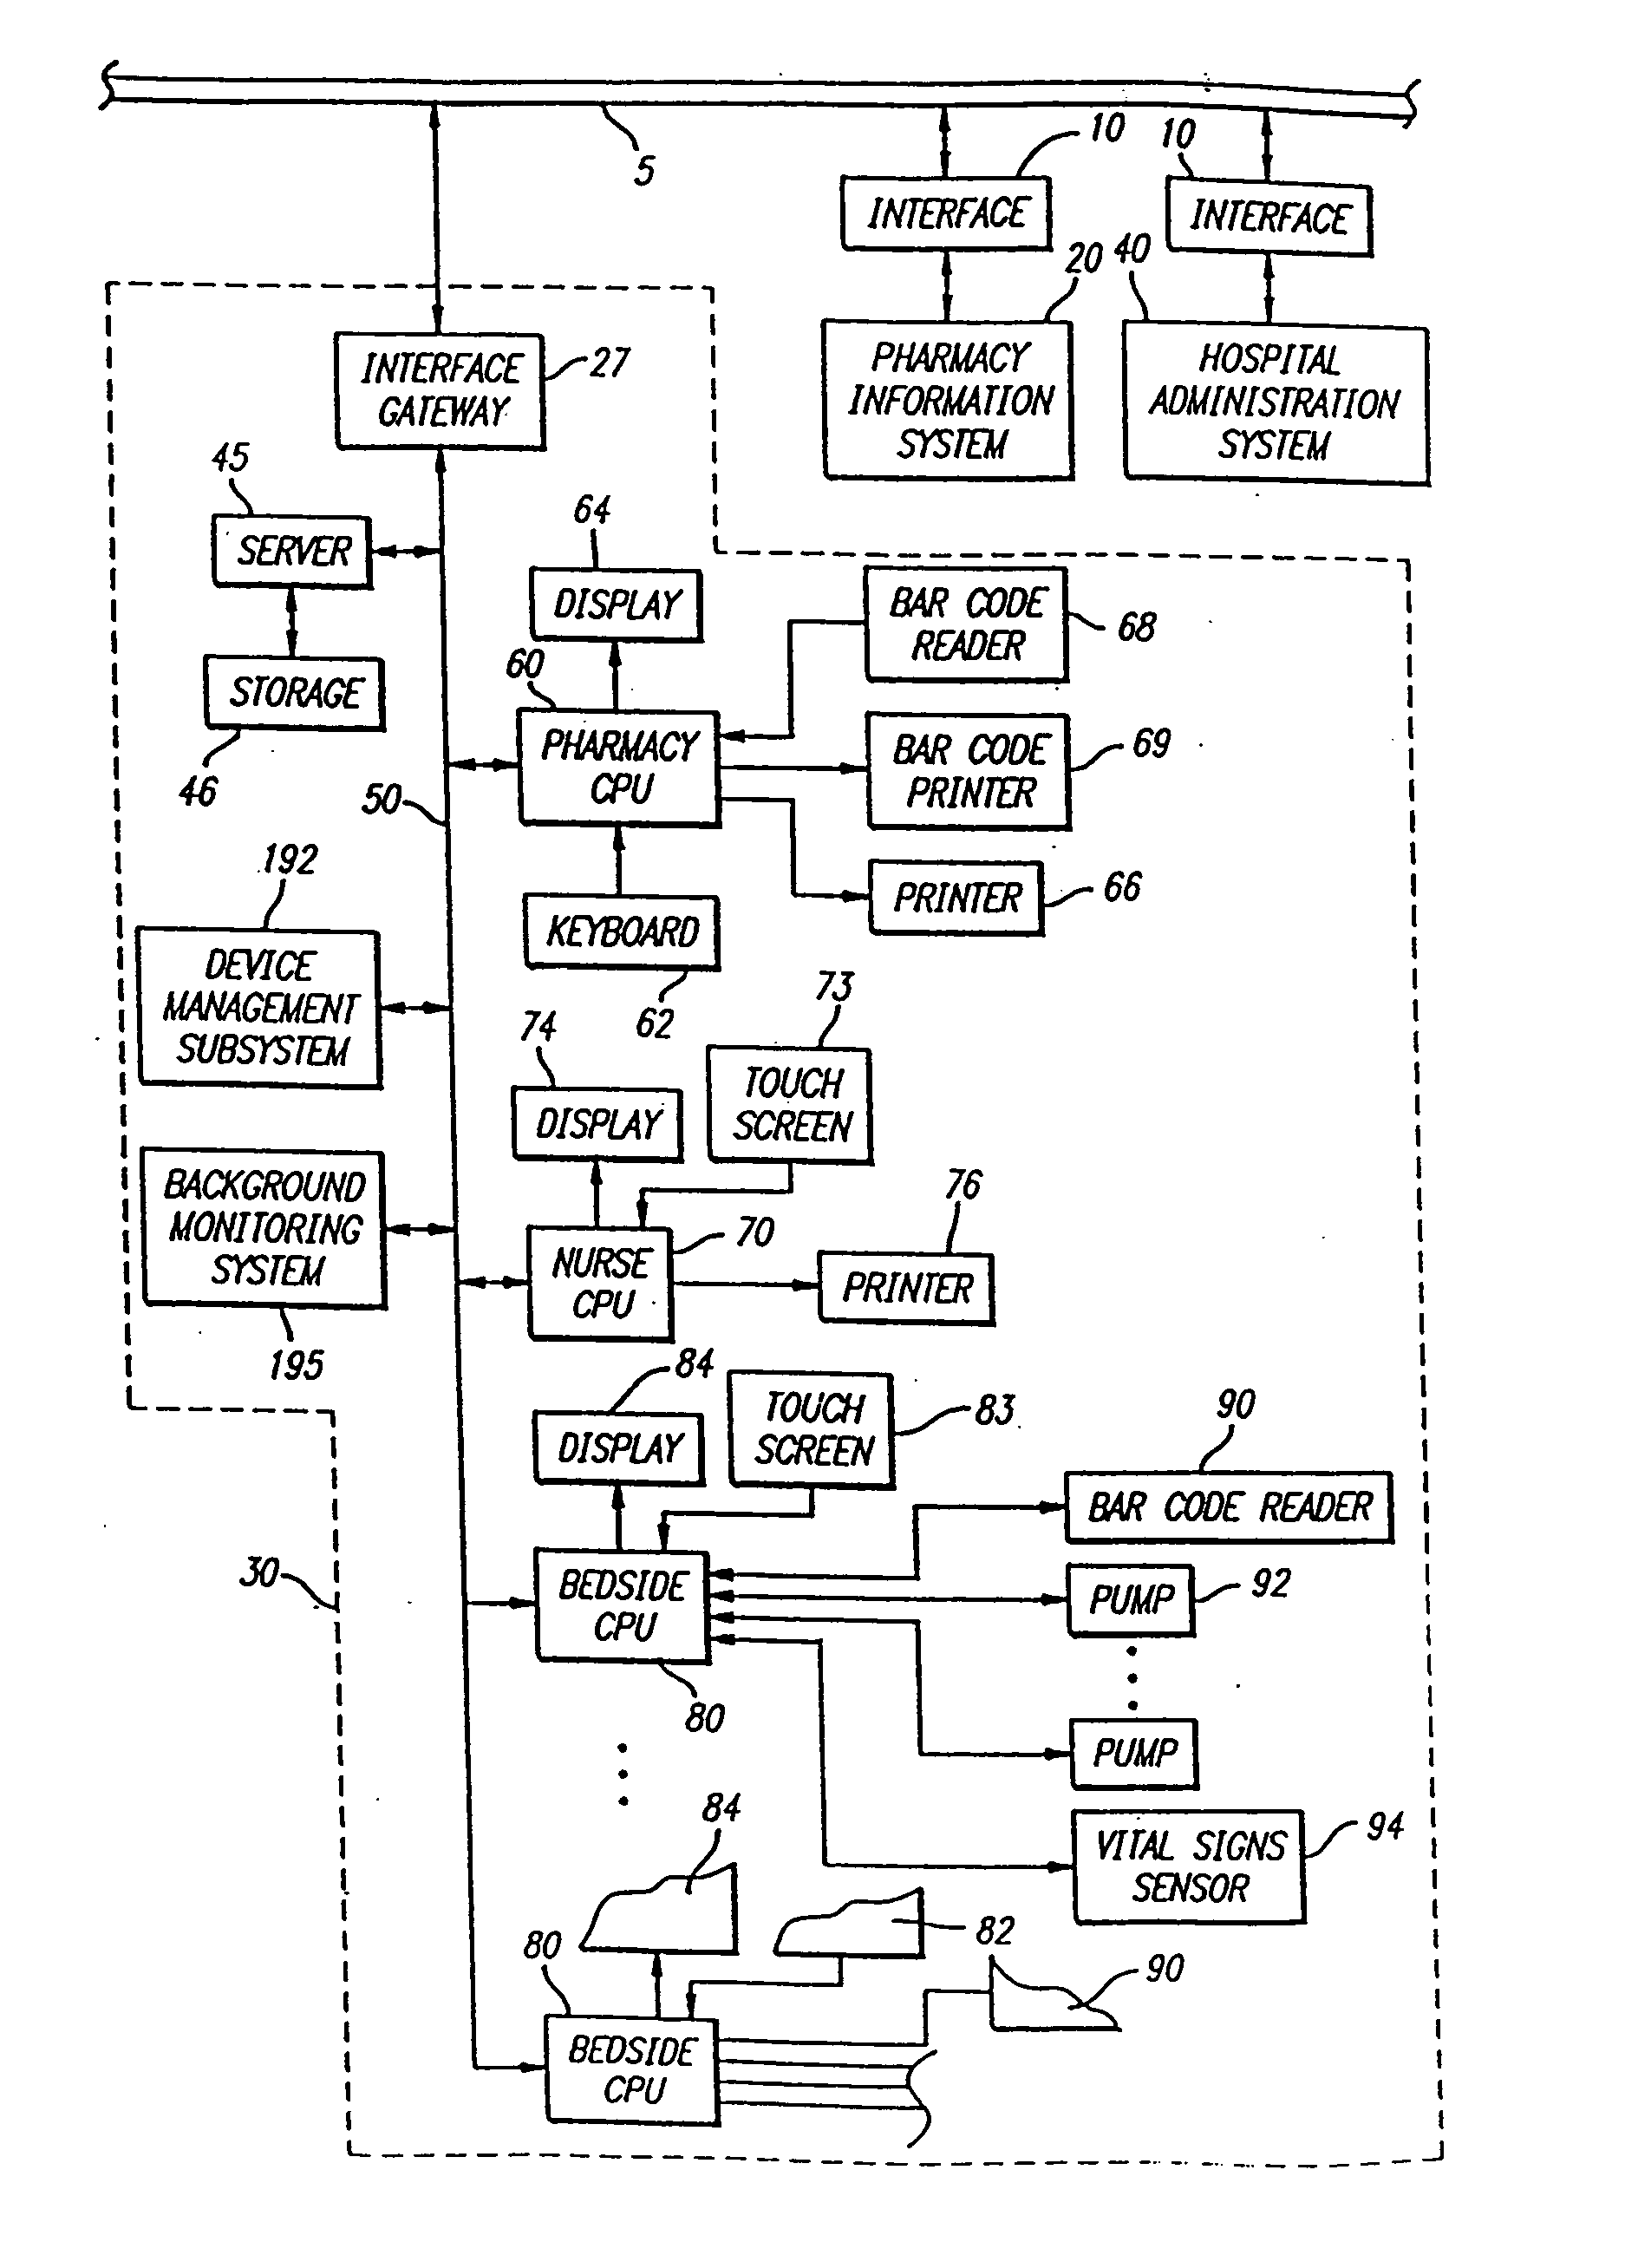 System and method for controlling the delivery of medication to a patient